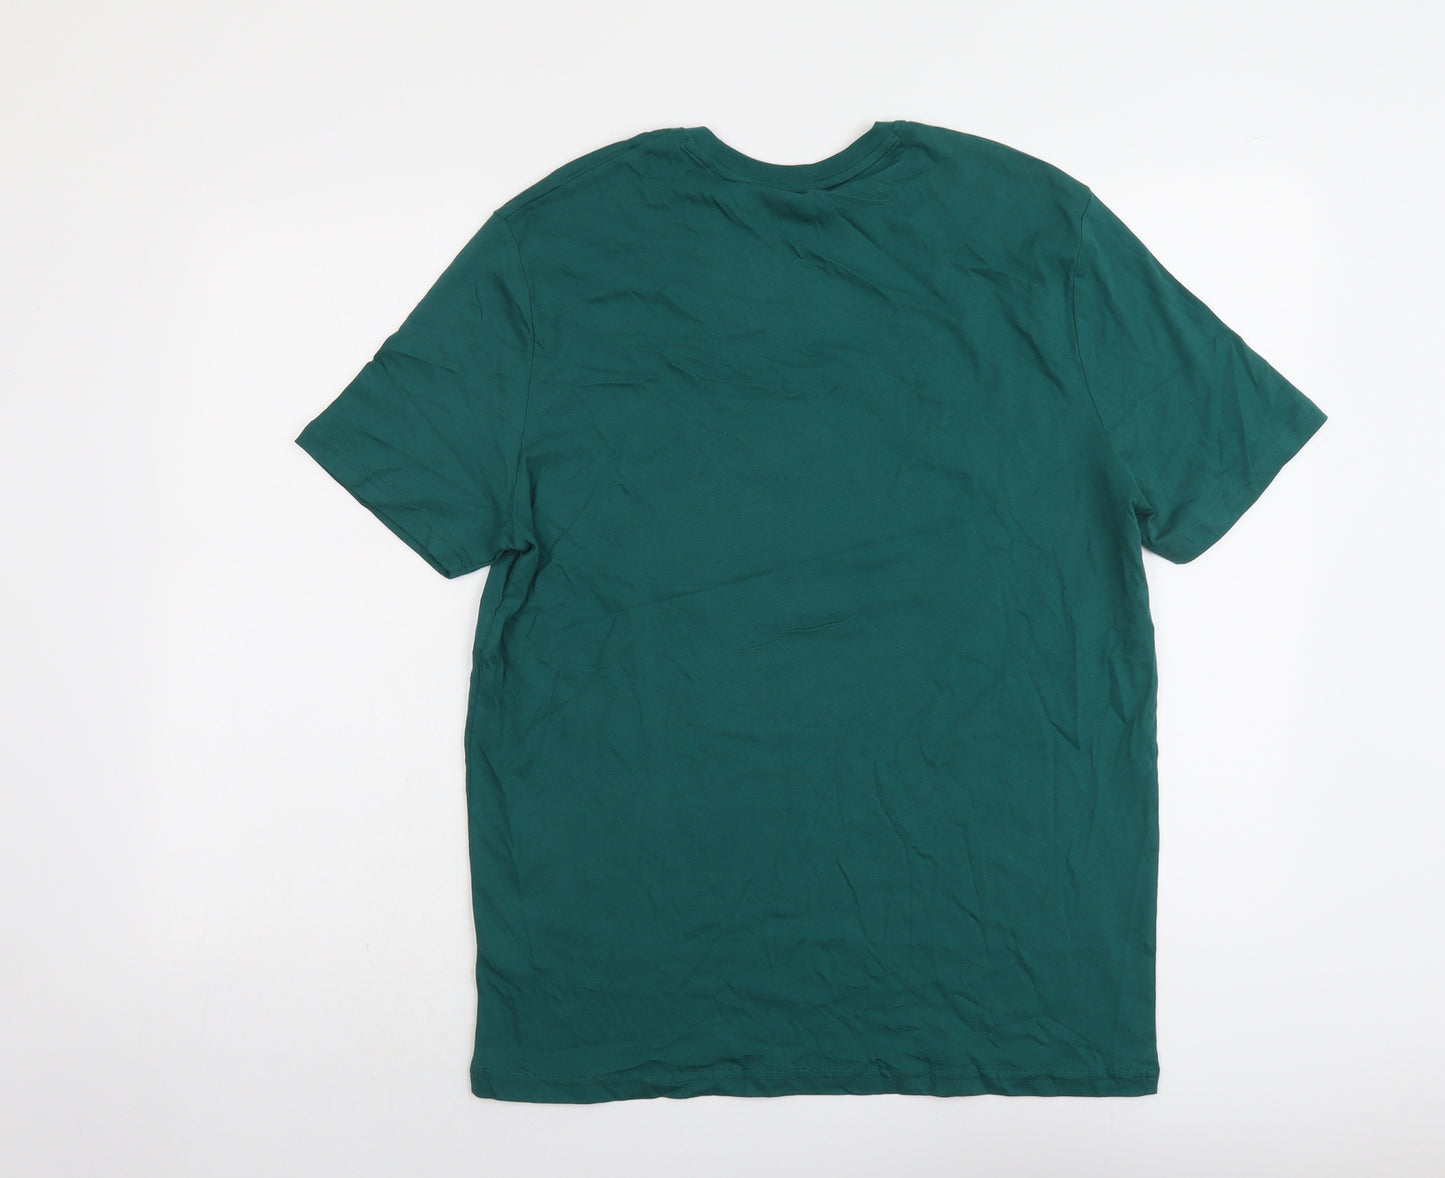 Marks and Spencer Mens Green Cotton T-Shirt Size M Round Neck - Gin-gle All The Way